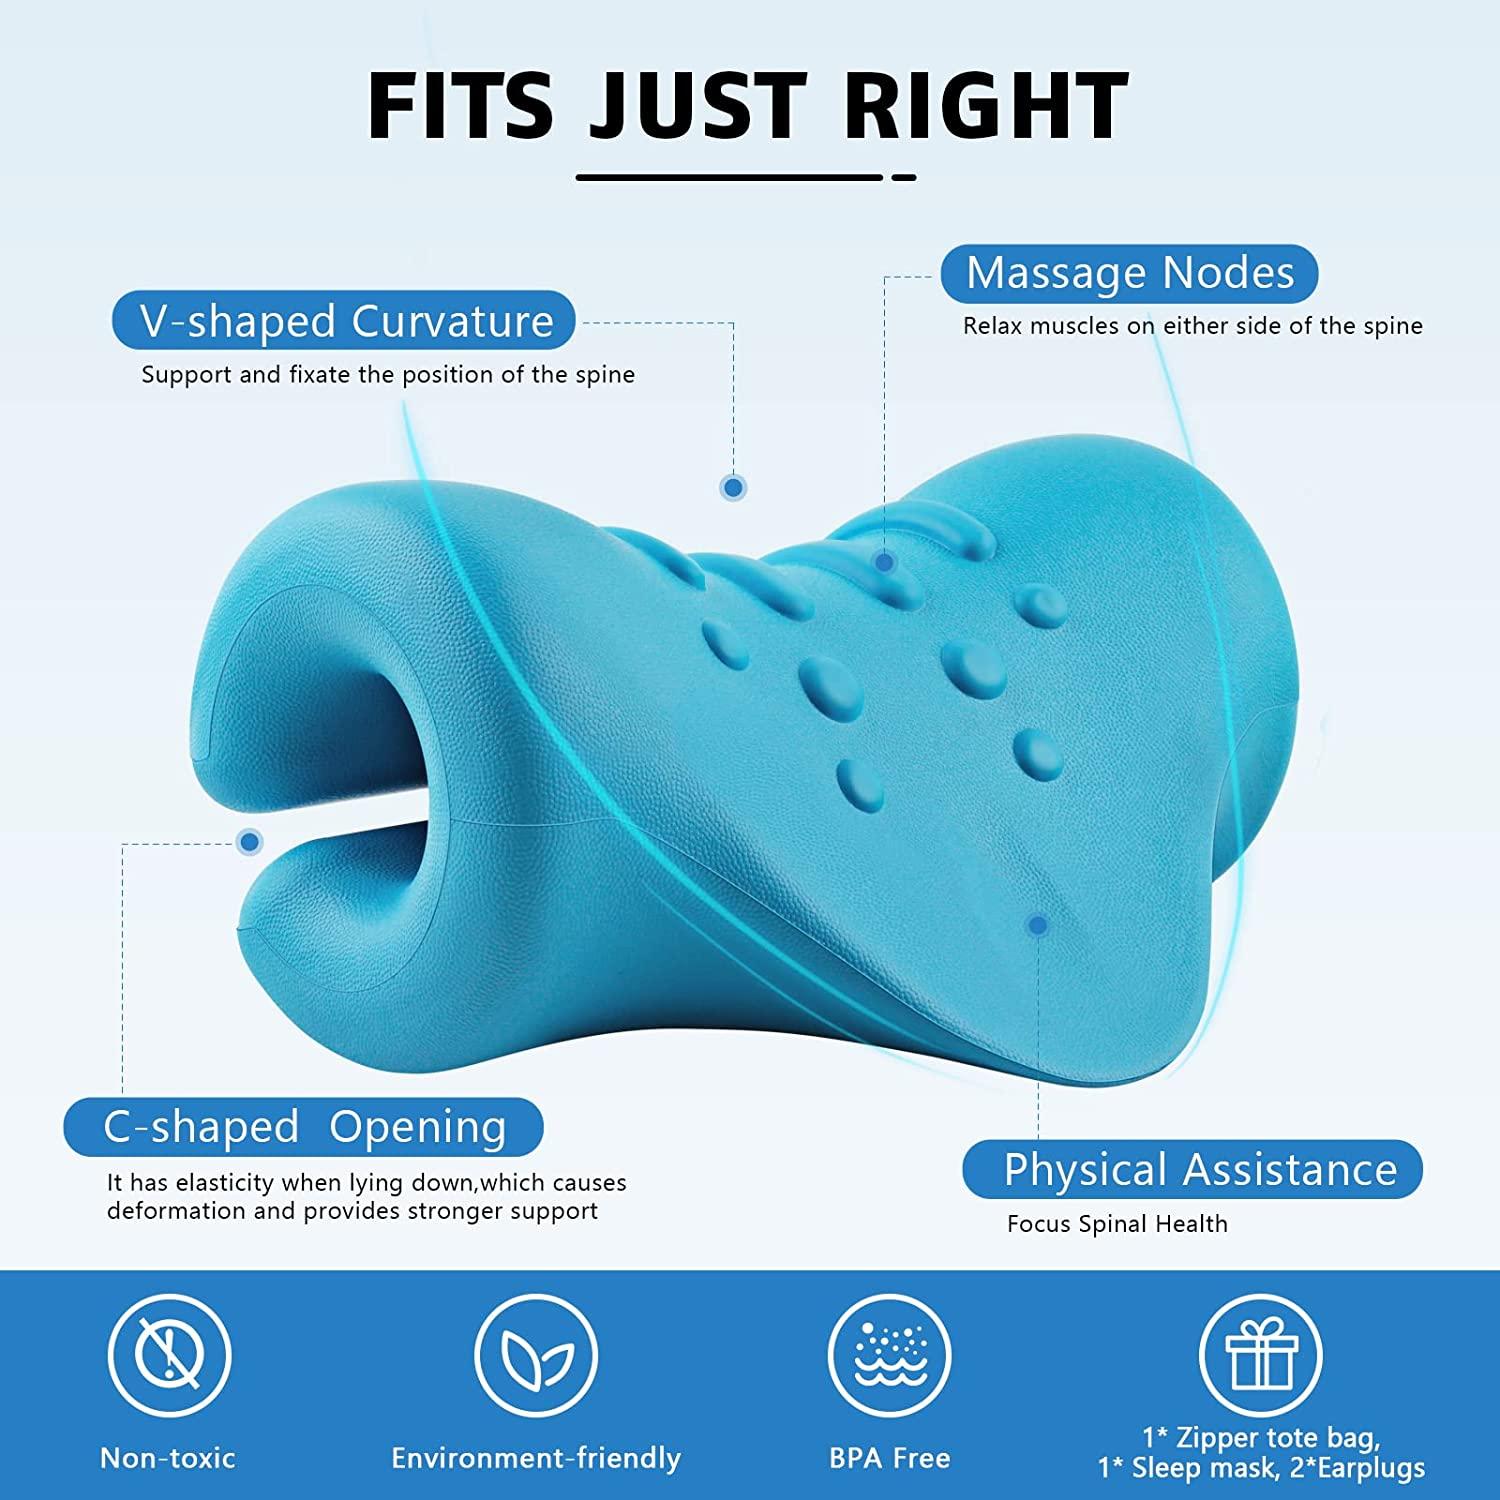 BACK Neck Stretcher, Neck and Shoulder Relaxer, Neck Cloud for Neck Pain  Relief, Chiropractic Neck Pillow, Posture Corrector